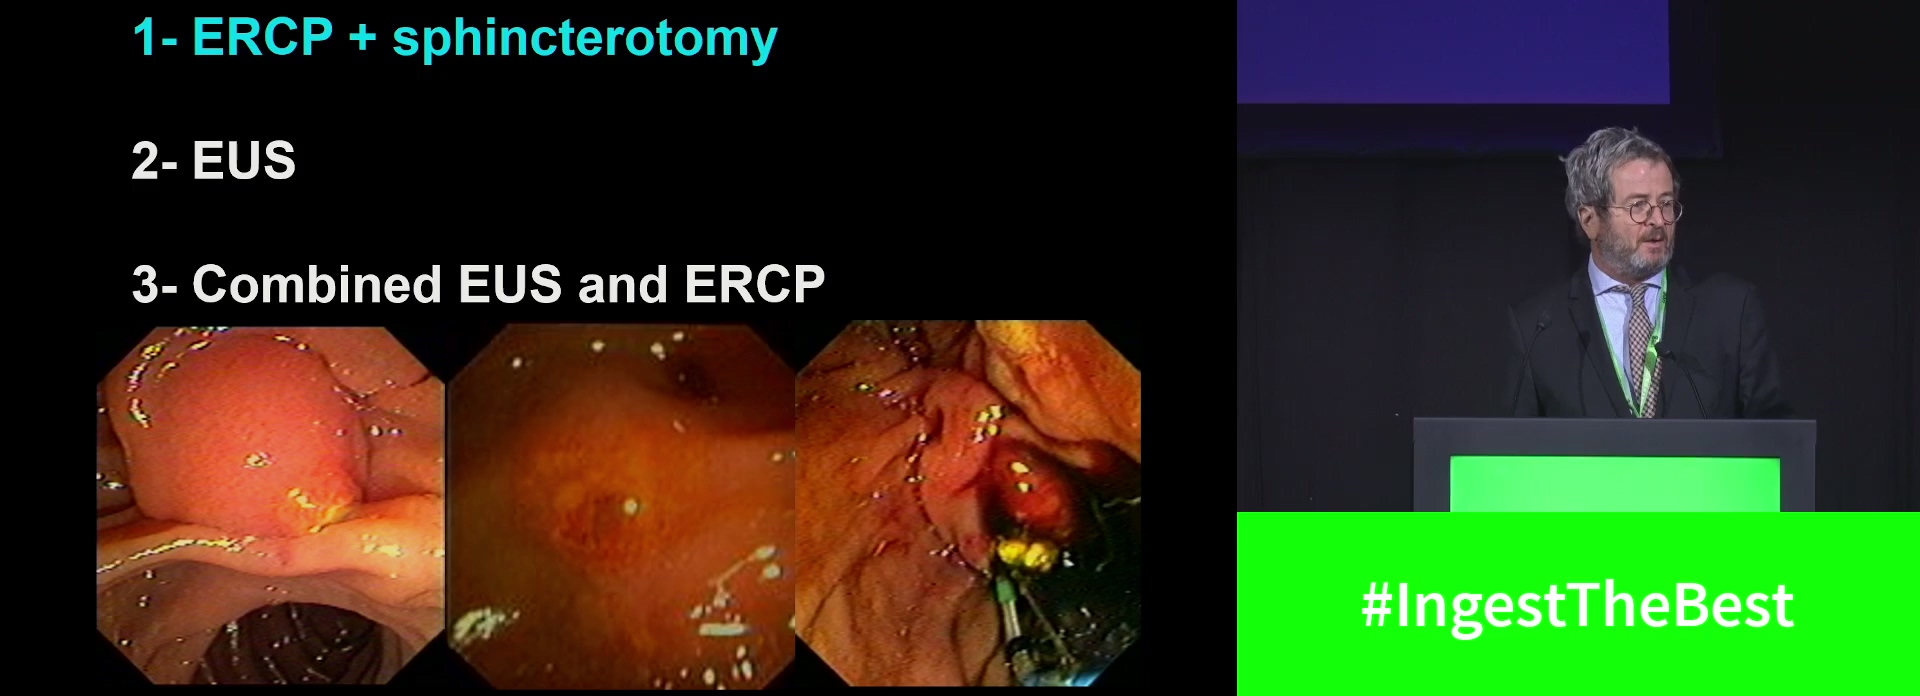 Biliary pancreatitis and endoscopy: When and how?